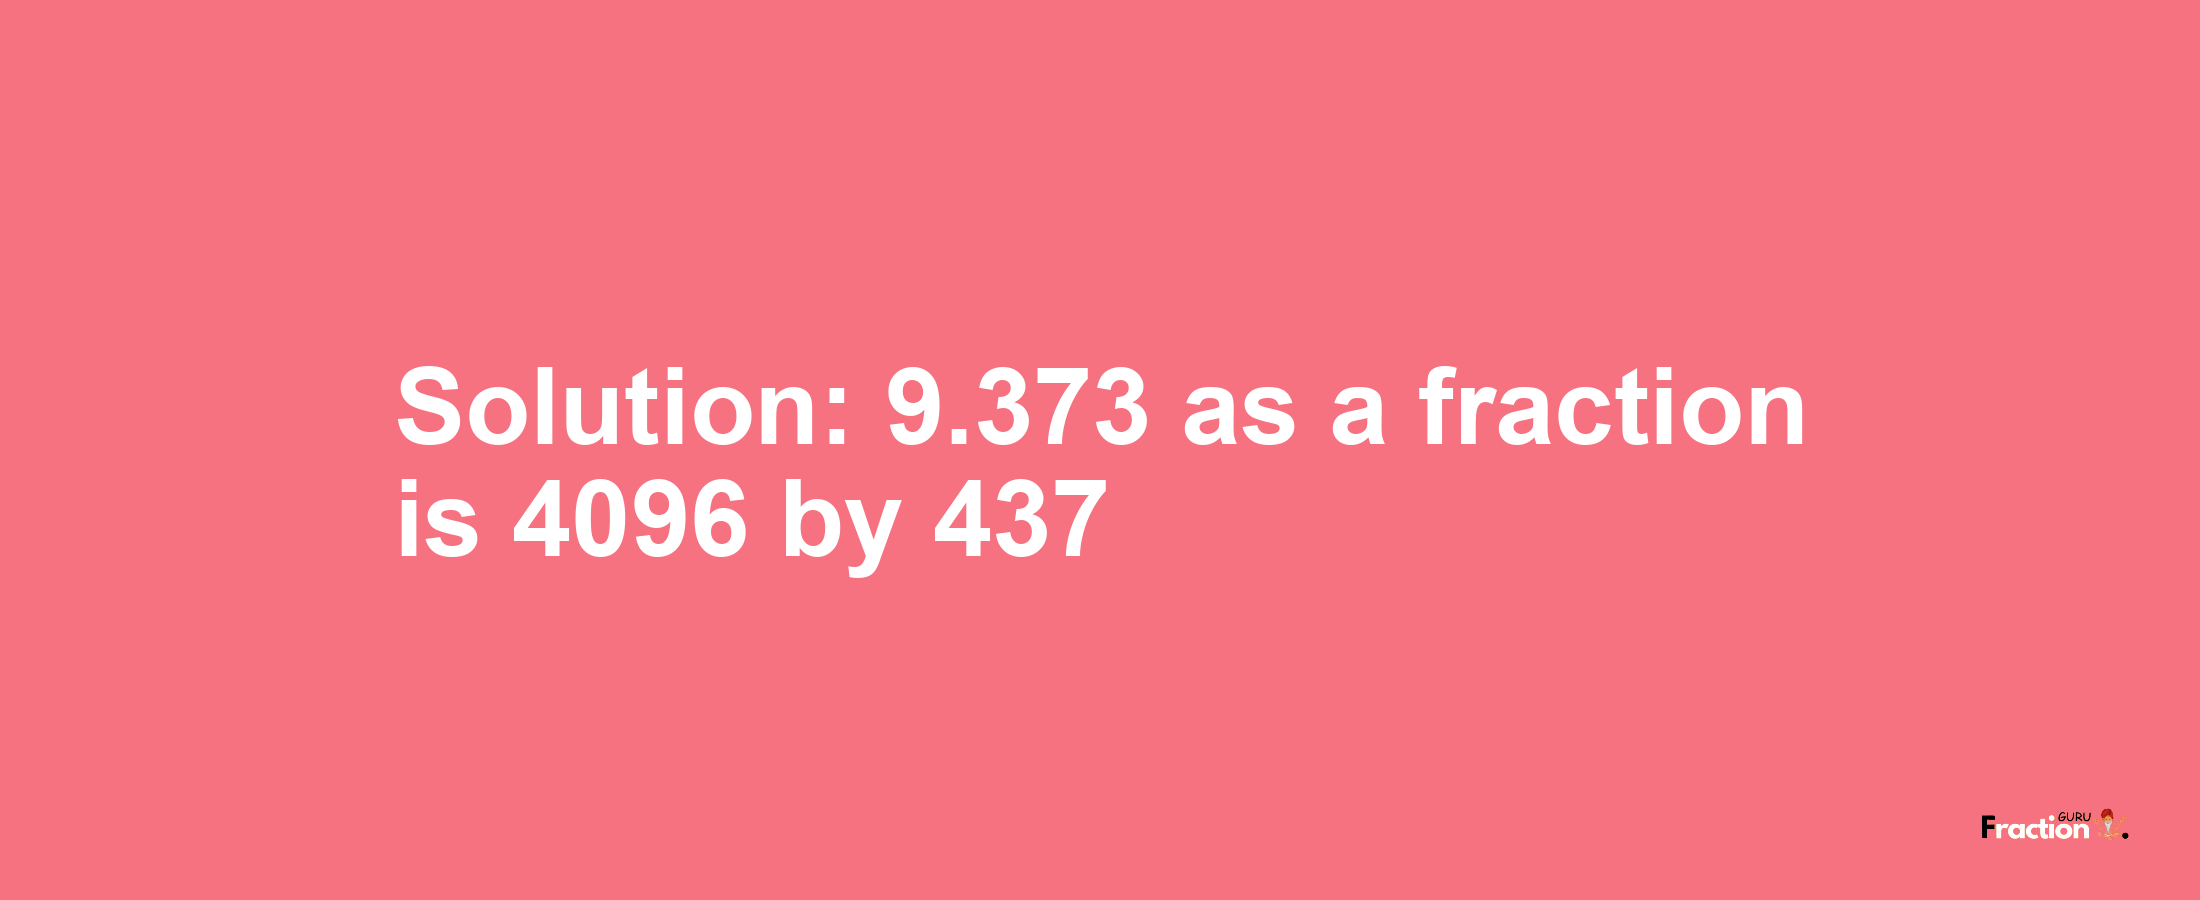 Solution:9.373 as a fraction is 4096/437